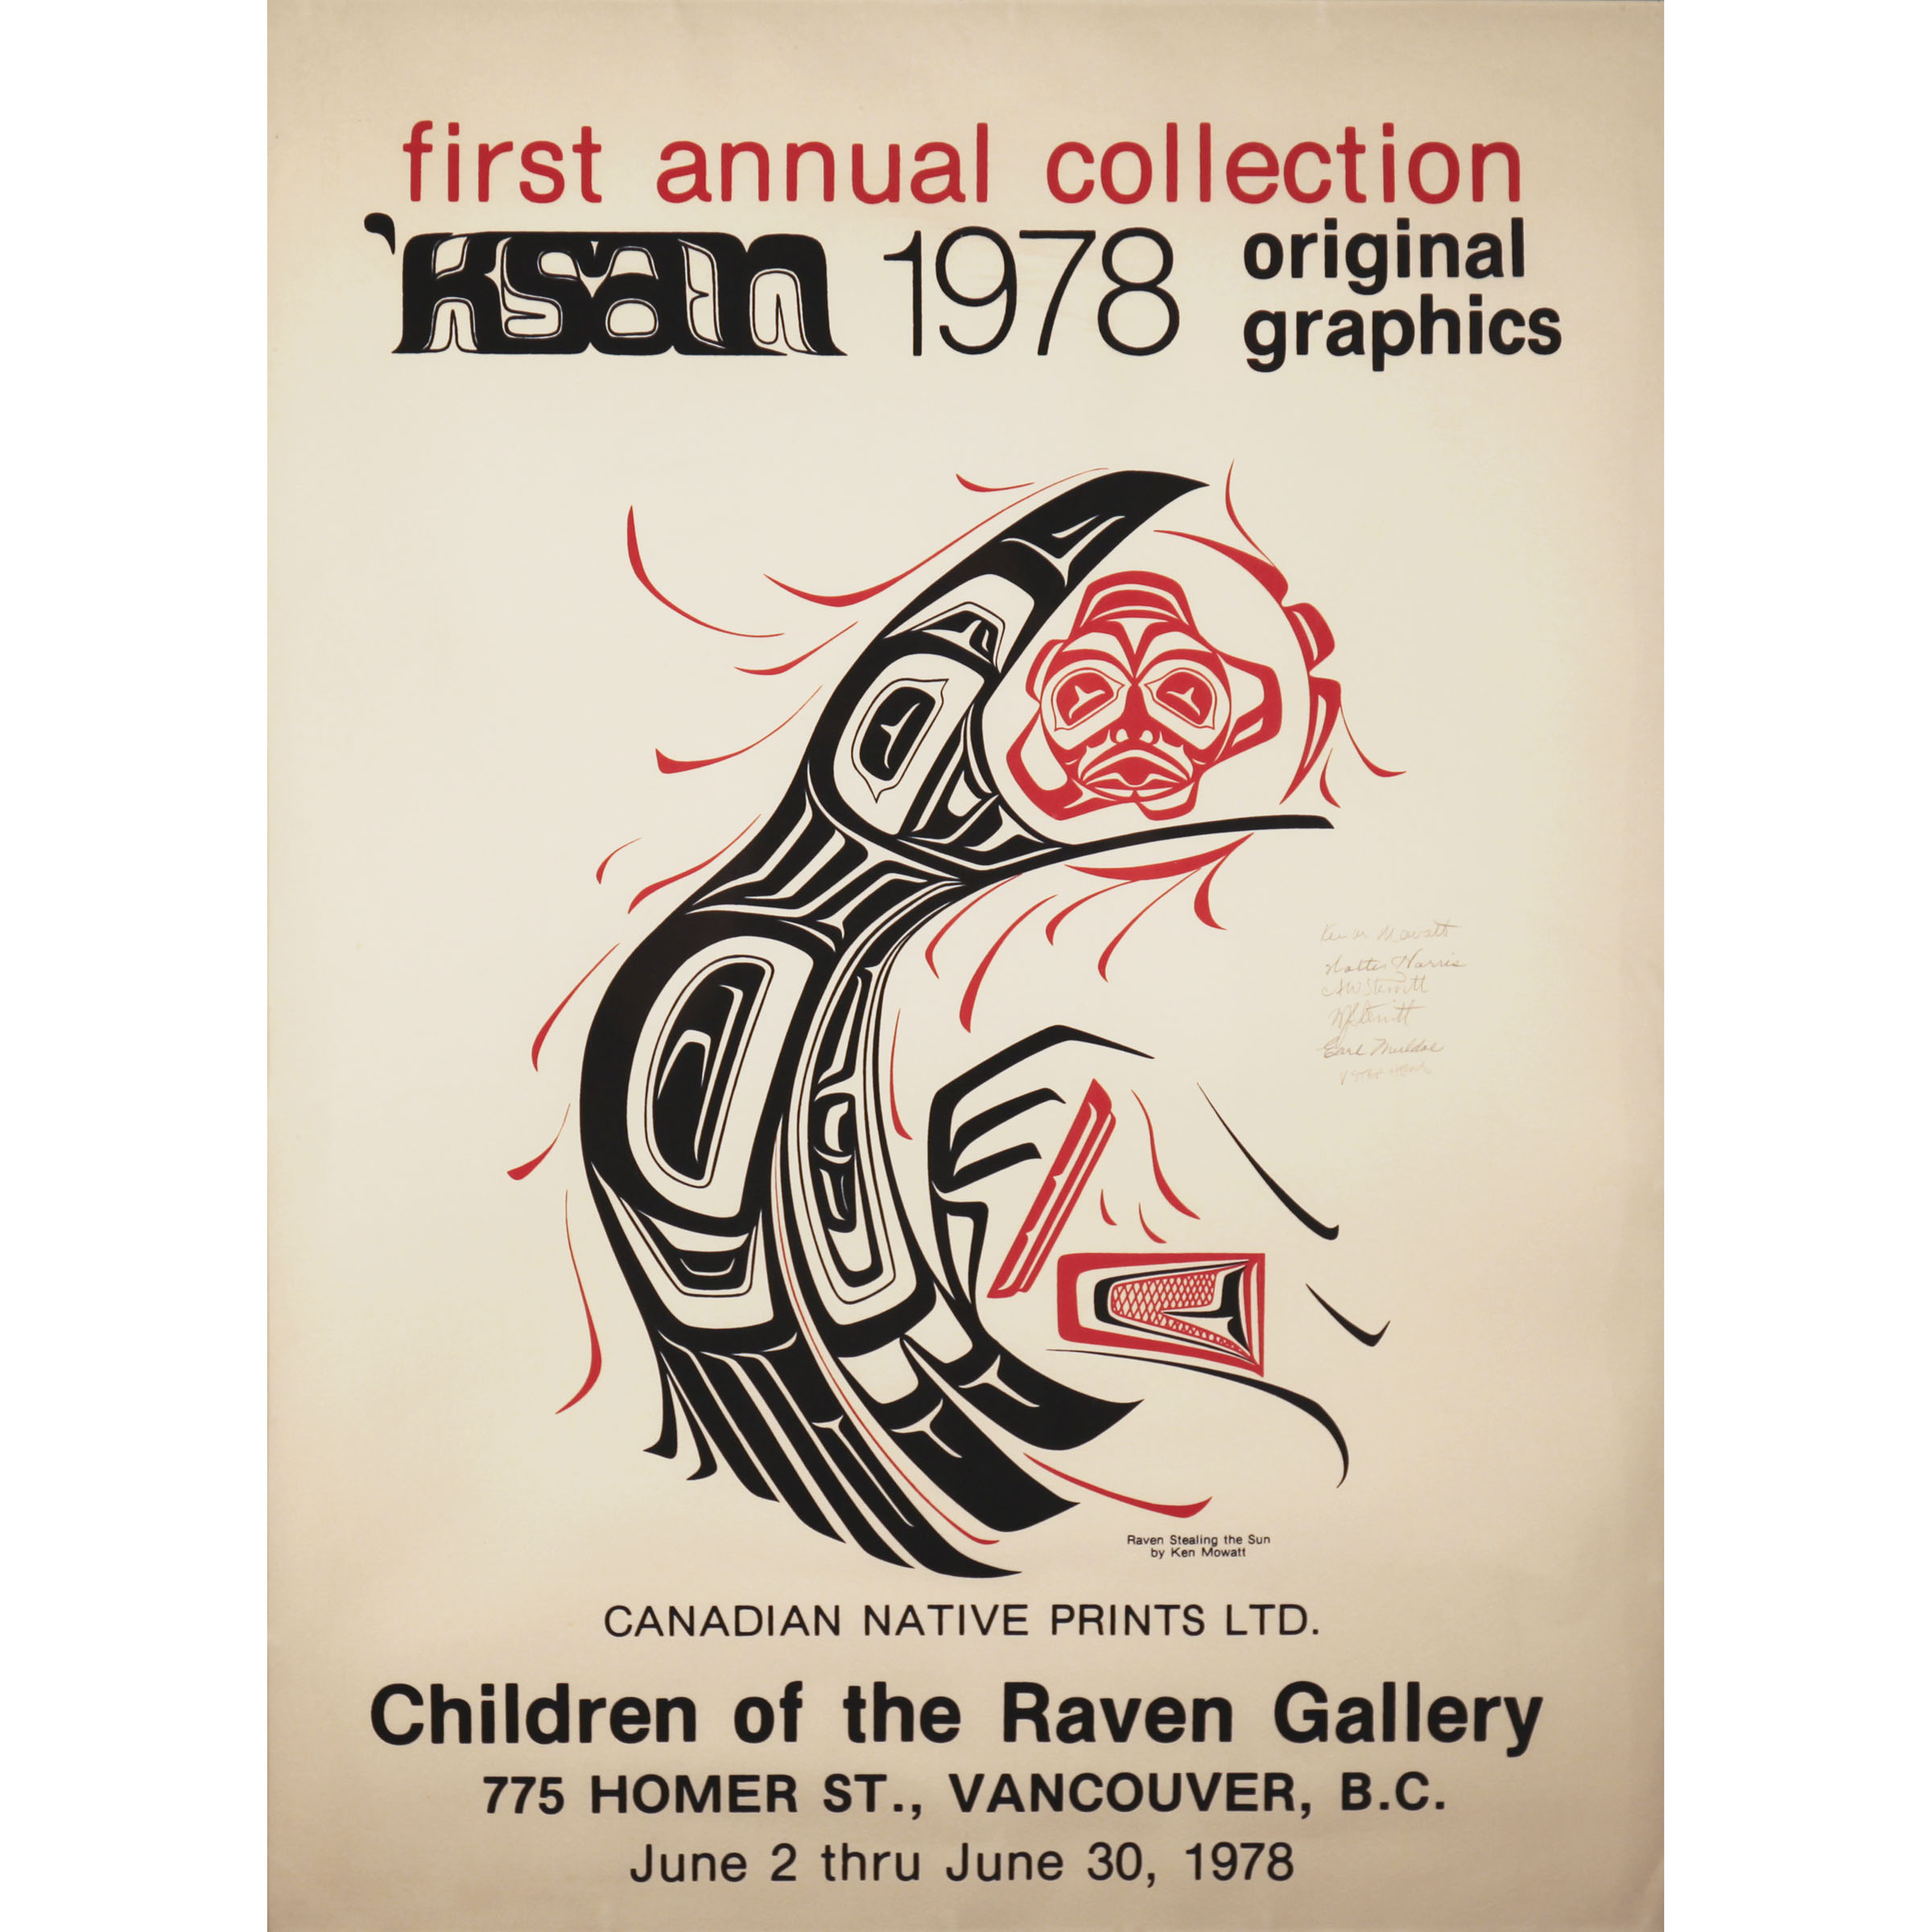 Children of the Raven Gallery Prints Collection Poster, 1978